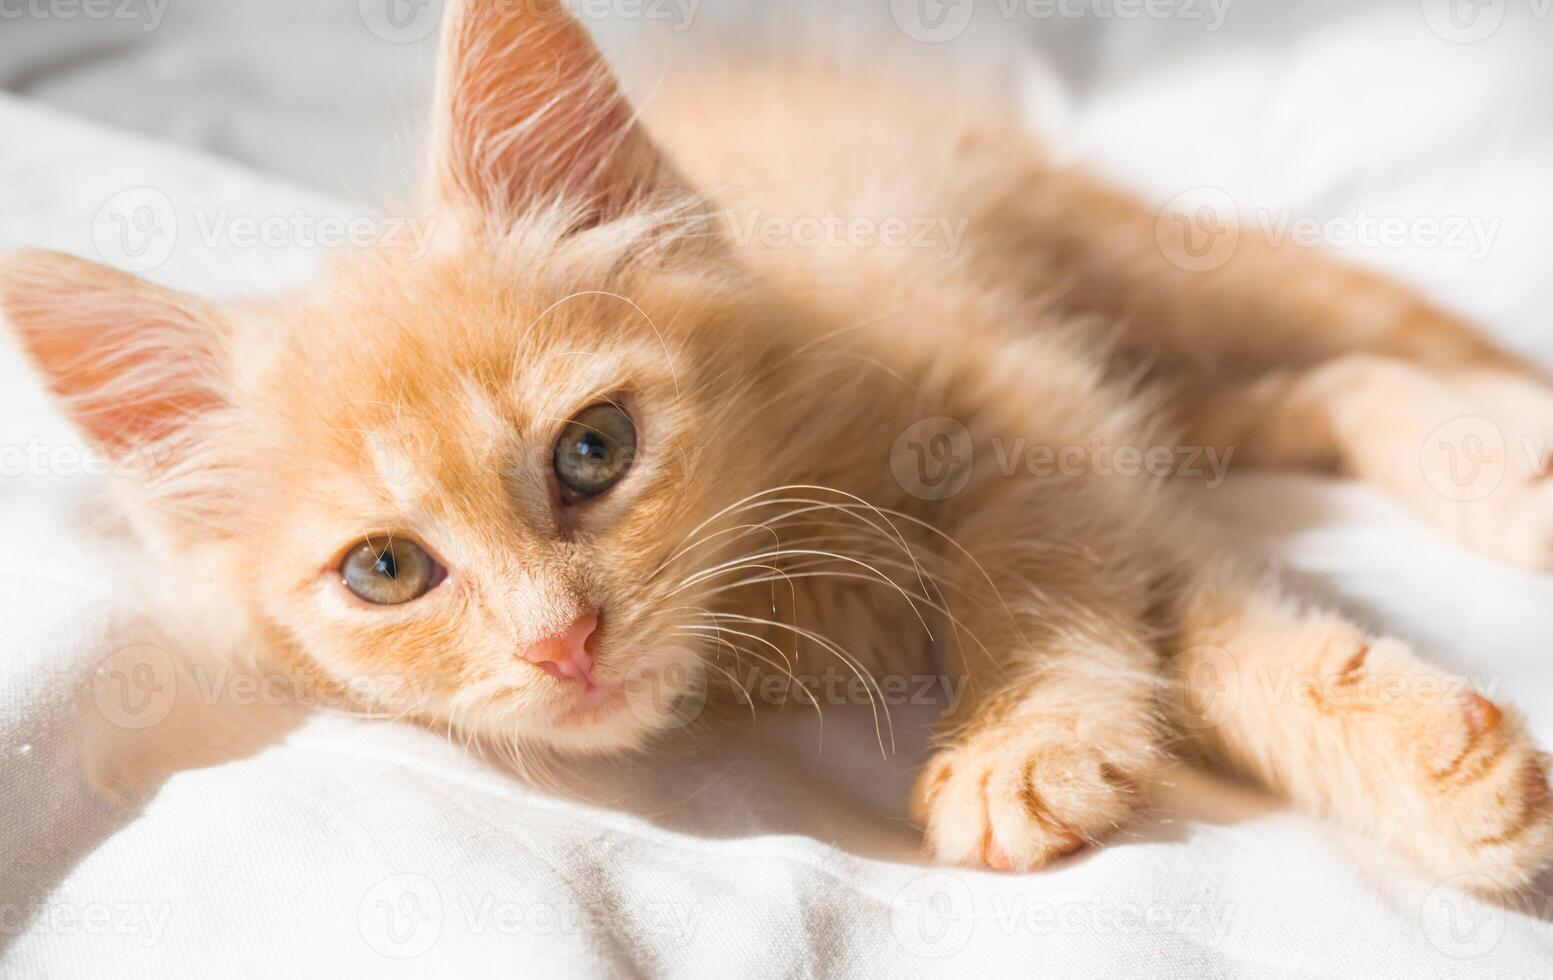 Cute little ginger kitten lies on a white blanket and looks at the camera photo